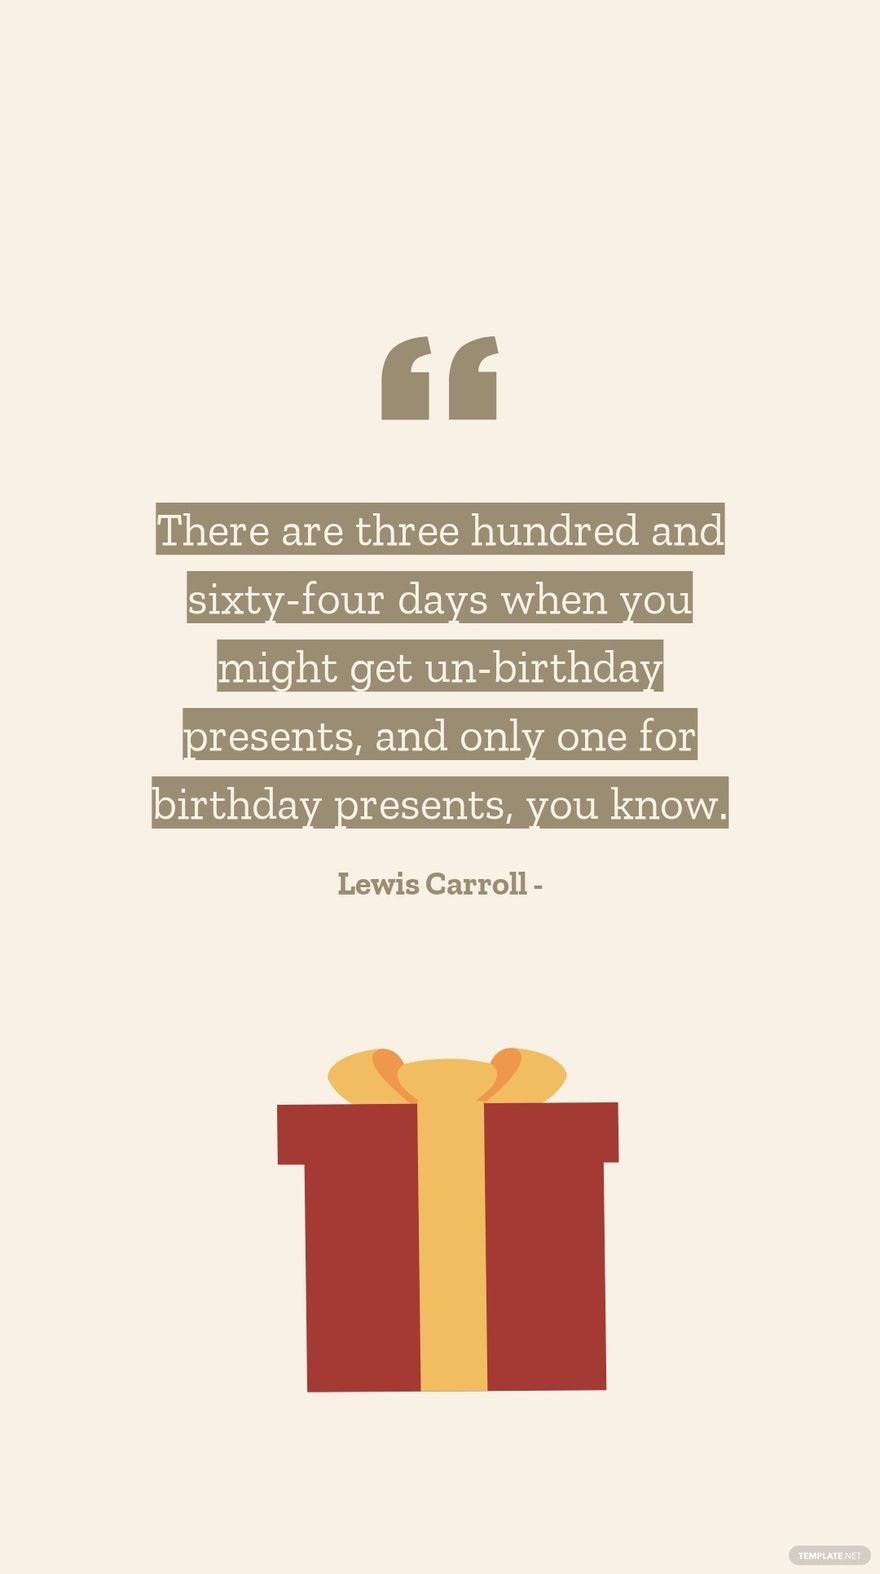 Lewis Carroll - There are three hundred and sixty-four days when you might get un-birthday presents, and only one for birthday presents, you know.